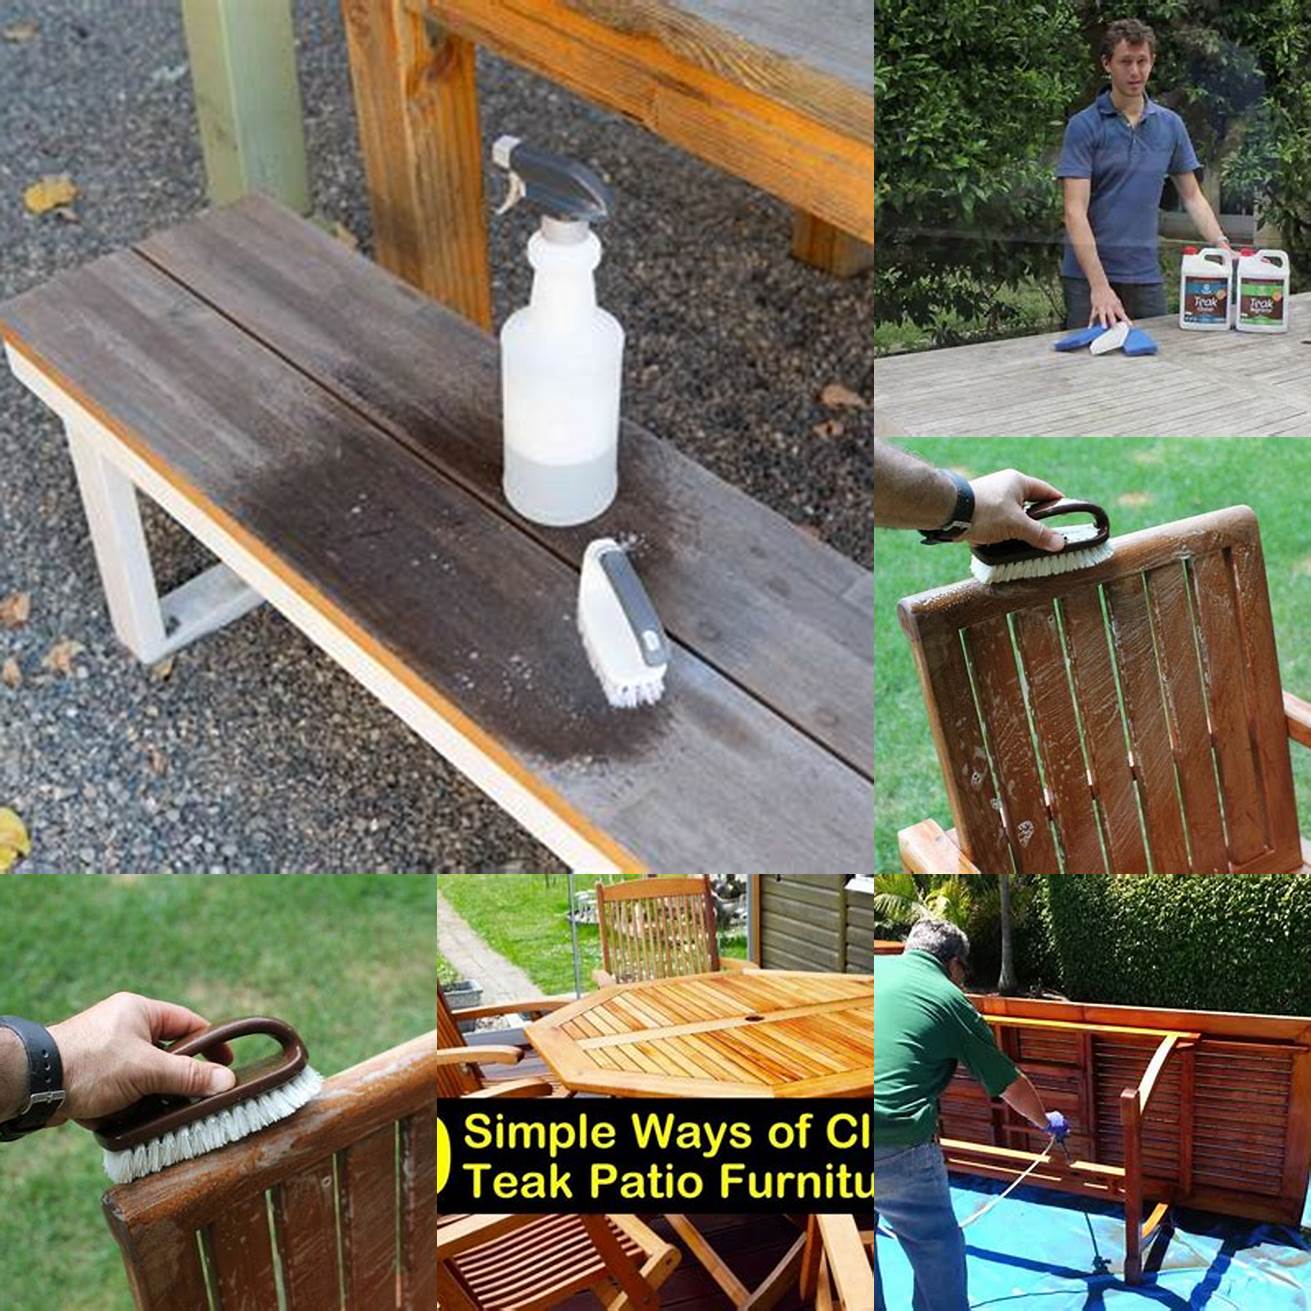 A picture of a person cleaning RHF Divano Teak furniture